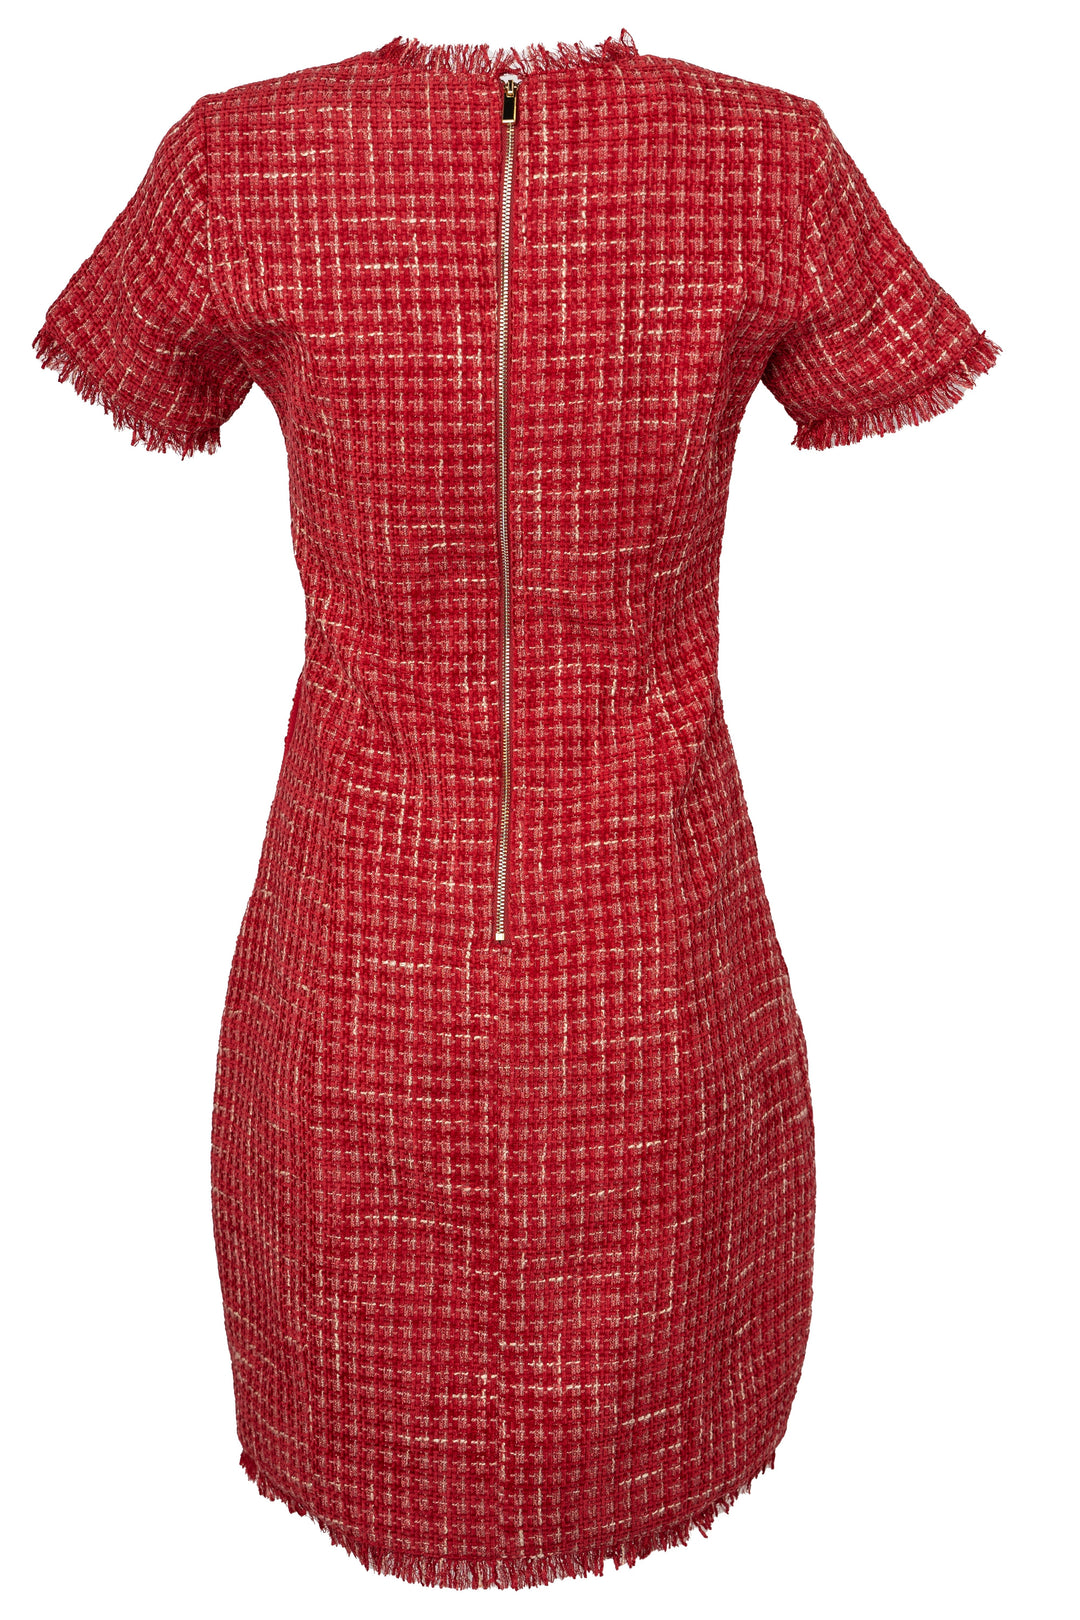 Reese Dress in Red - FINAL SALE-Adult